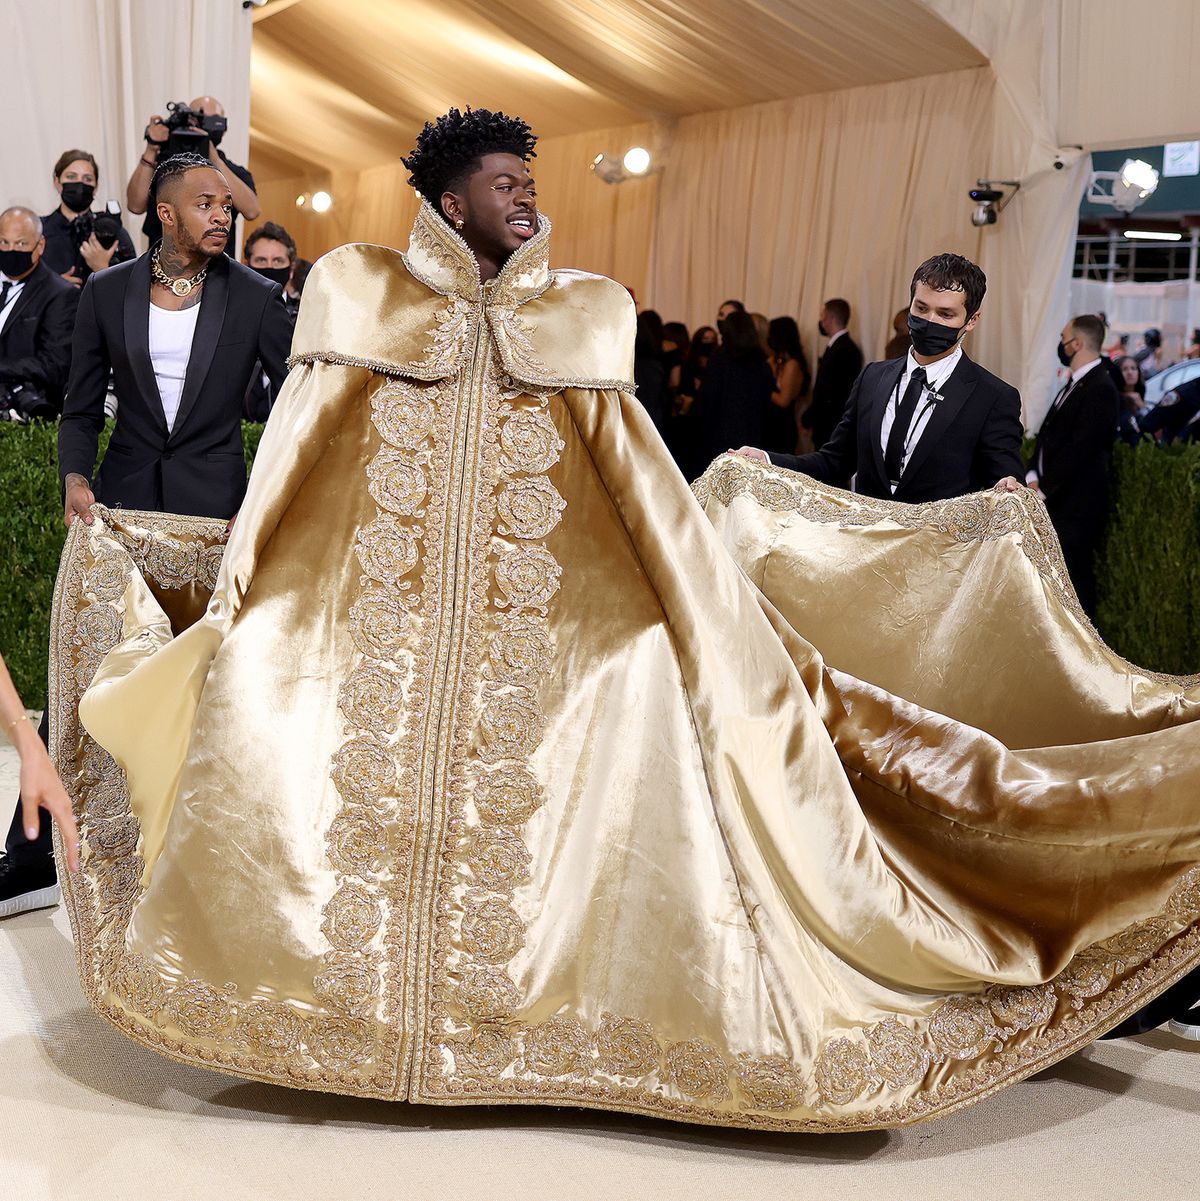 The best and biggest looks from the men at the Met Gala